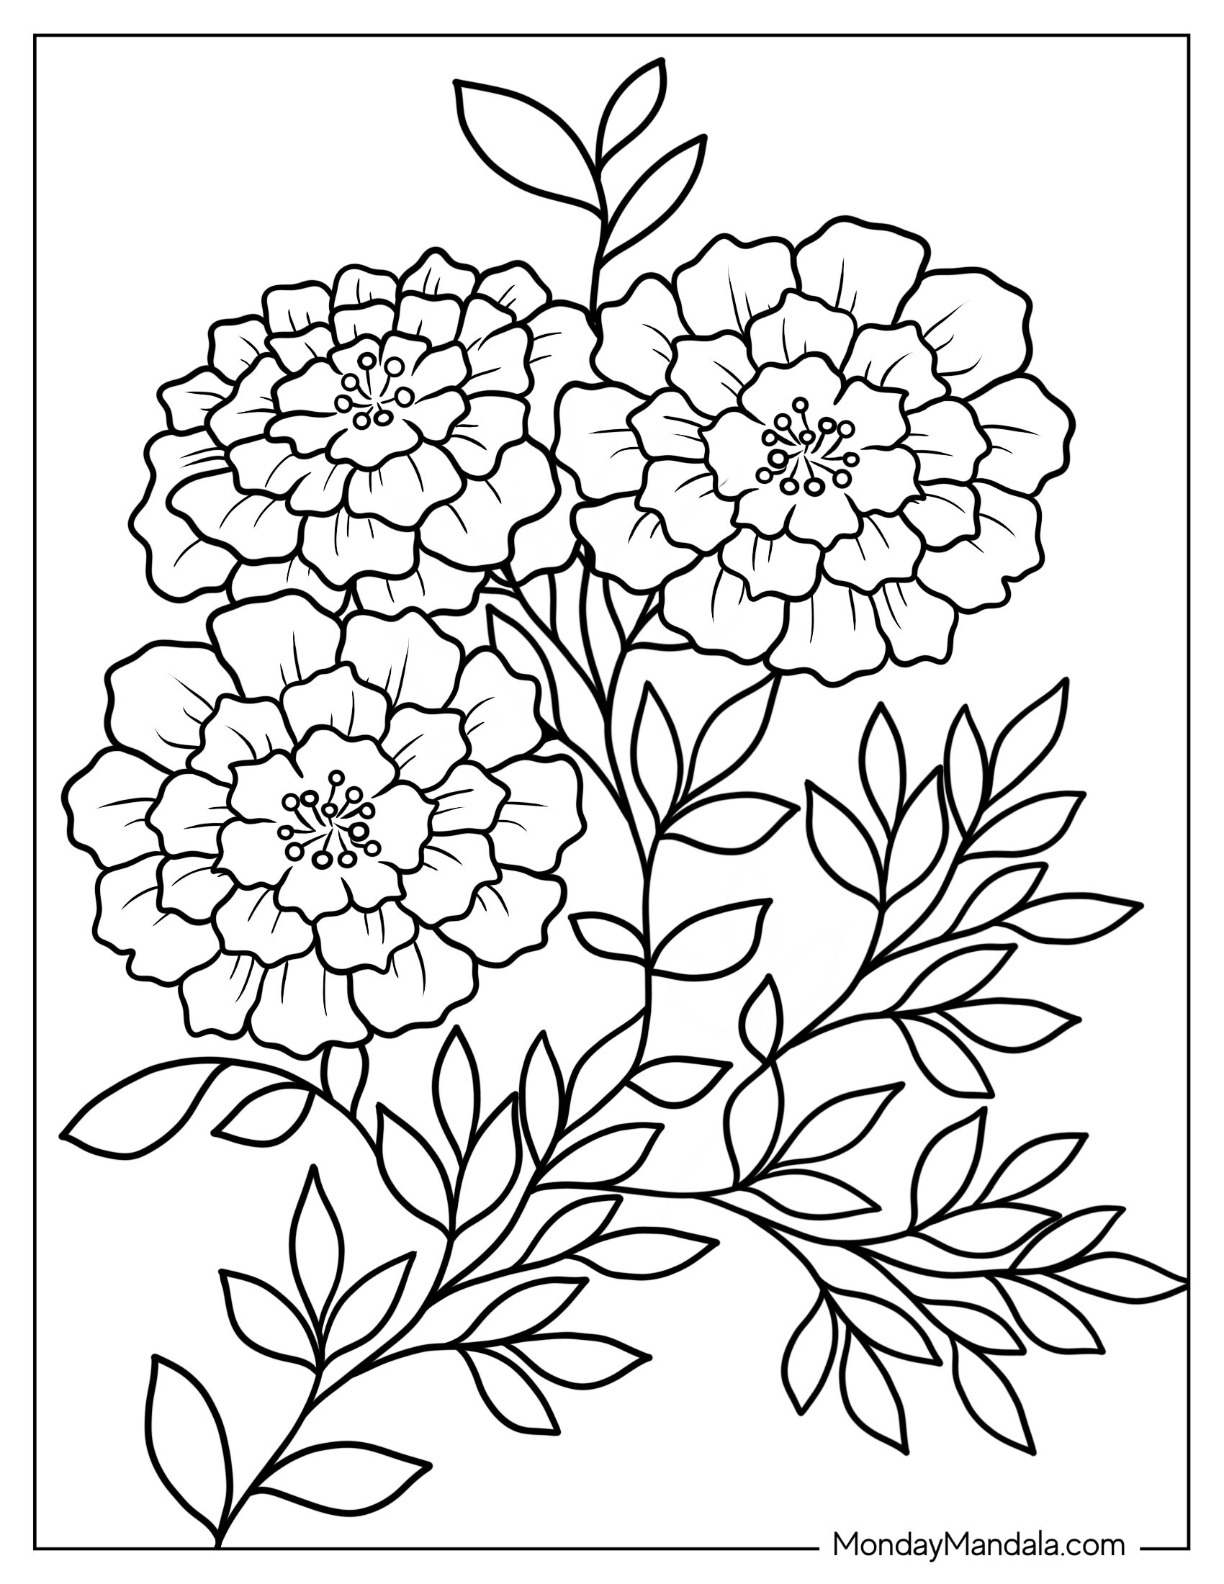 53 Flower Coloring Pages (Free Pdf Printables) intended for Free Printable Flower Coloring Pages